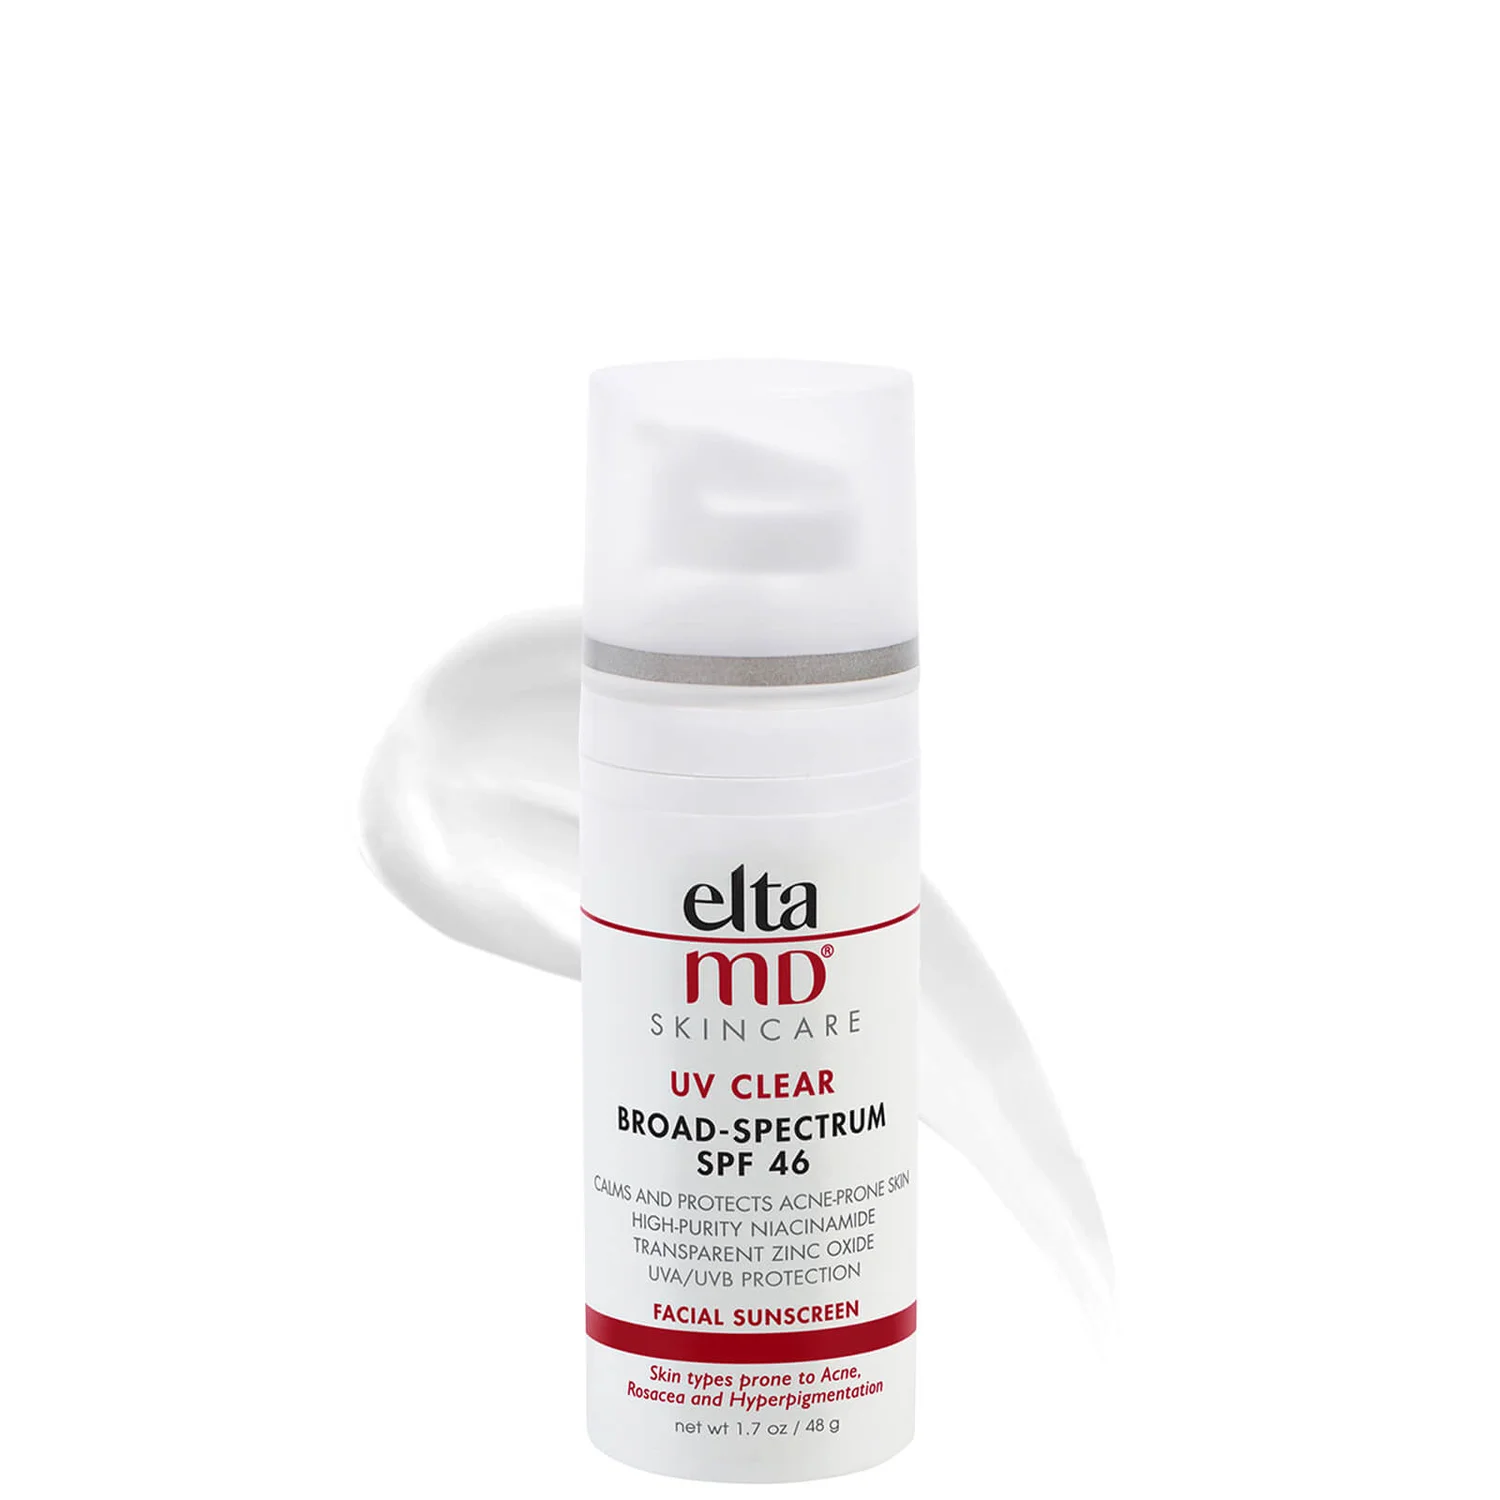 A white and red 48-g pump bottle of the EltaMD UV Clear SPF 46 Face Sunscreen. On the bottle, it says: elta MD, SKINCARE, UV CLEAR, BROAD-SPECTRUM SPF 46, CALMS AND PROTECTS ACNE-PRONE SKIN, HIGH-PURITY NIACINAMIDE, TRANSPARENT ZINC OXIDE, UVA/UVB PROTECTION, FACIAL SUNSCREEN, Skin types prone to Acne, Rosacea and Hyperpigmentation

